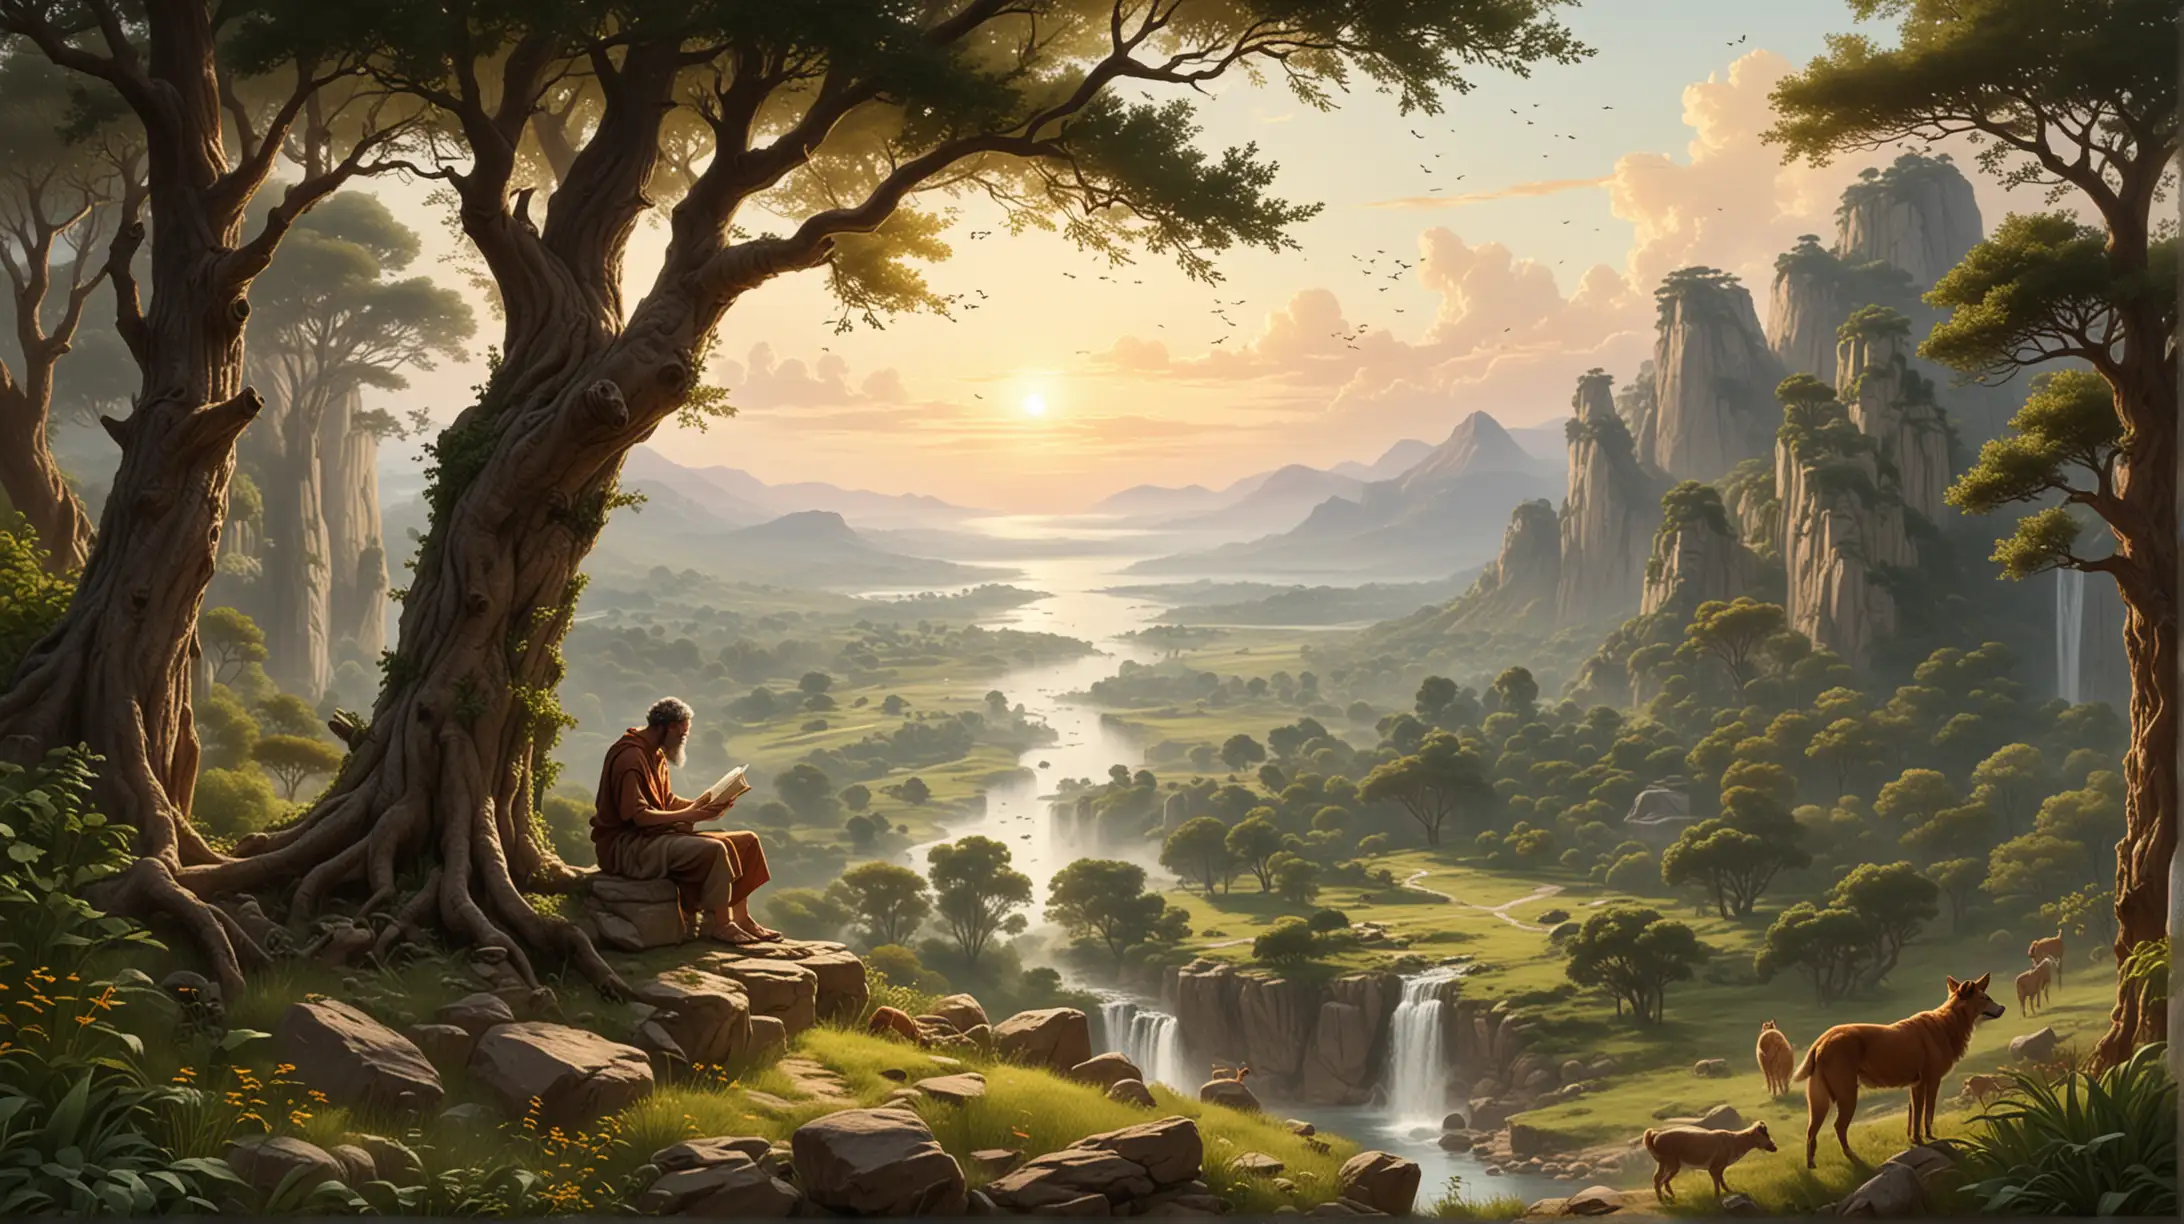 Illustrate the stoic principle of living in accordance with nature through a scene depicting a philosopher communing with the natural world. 